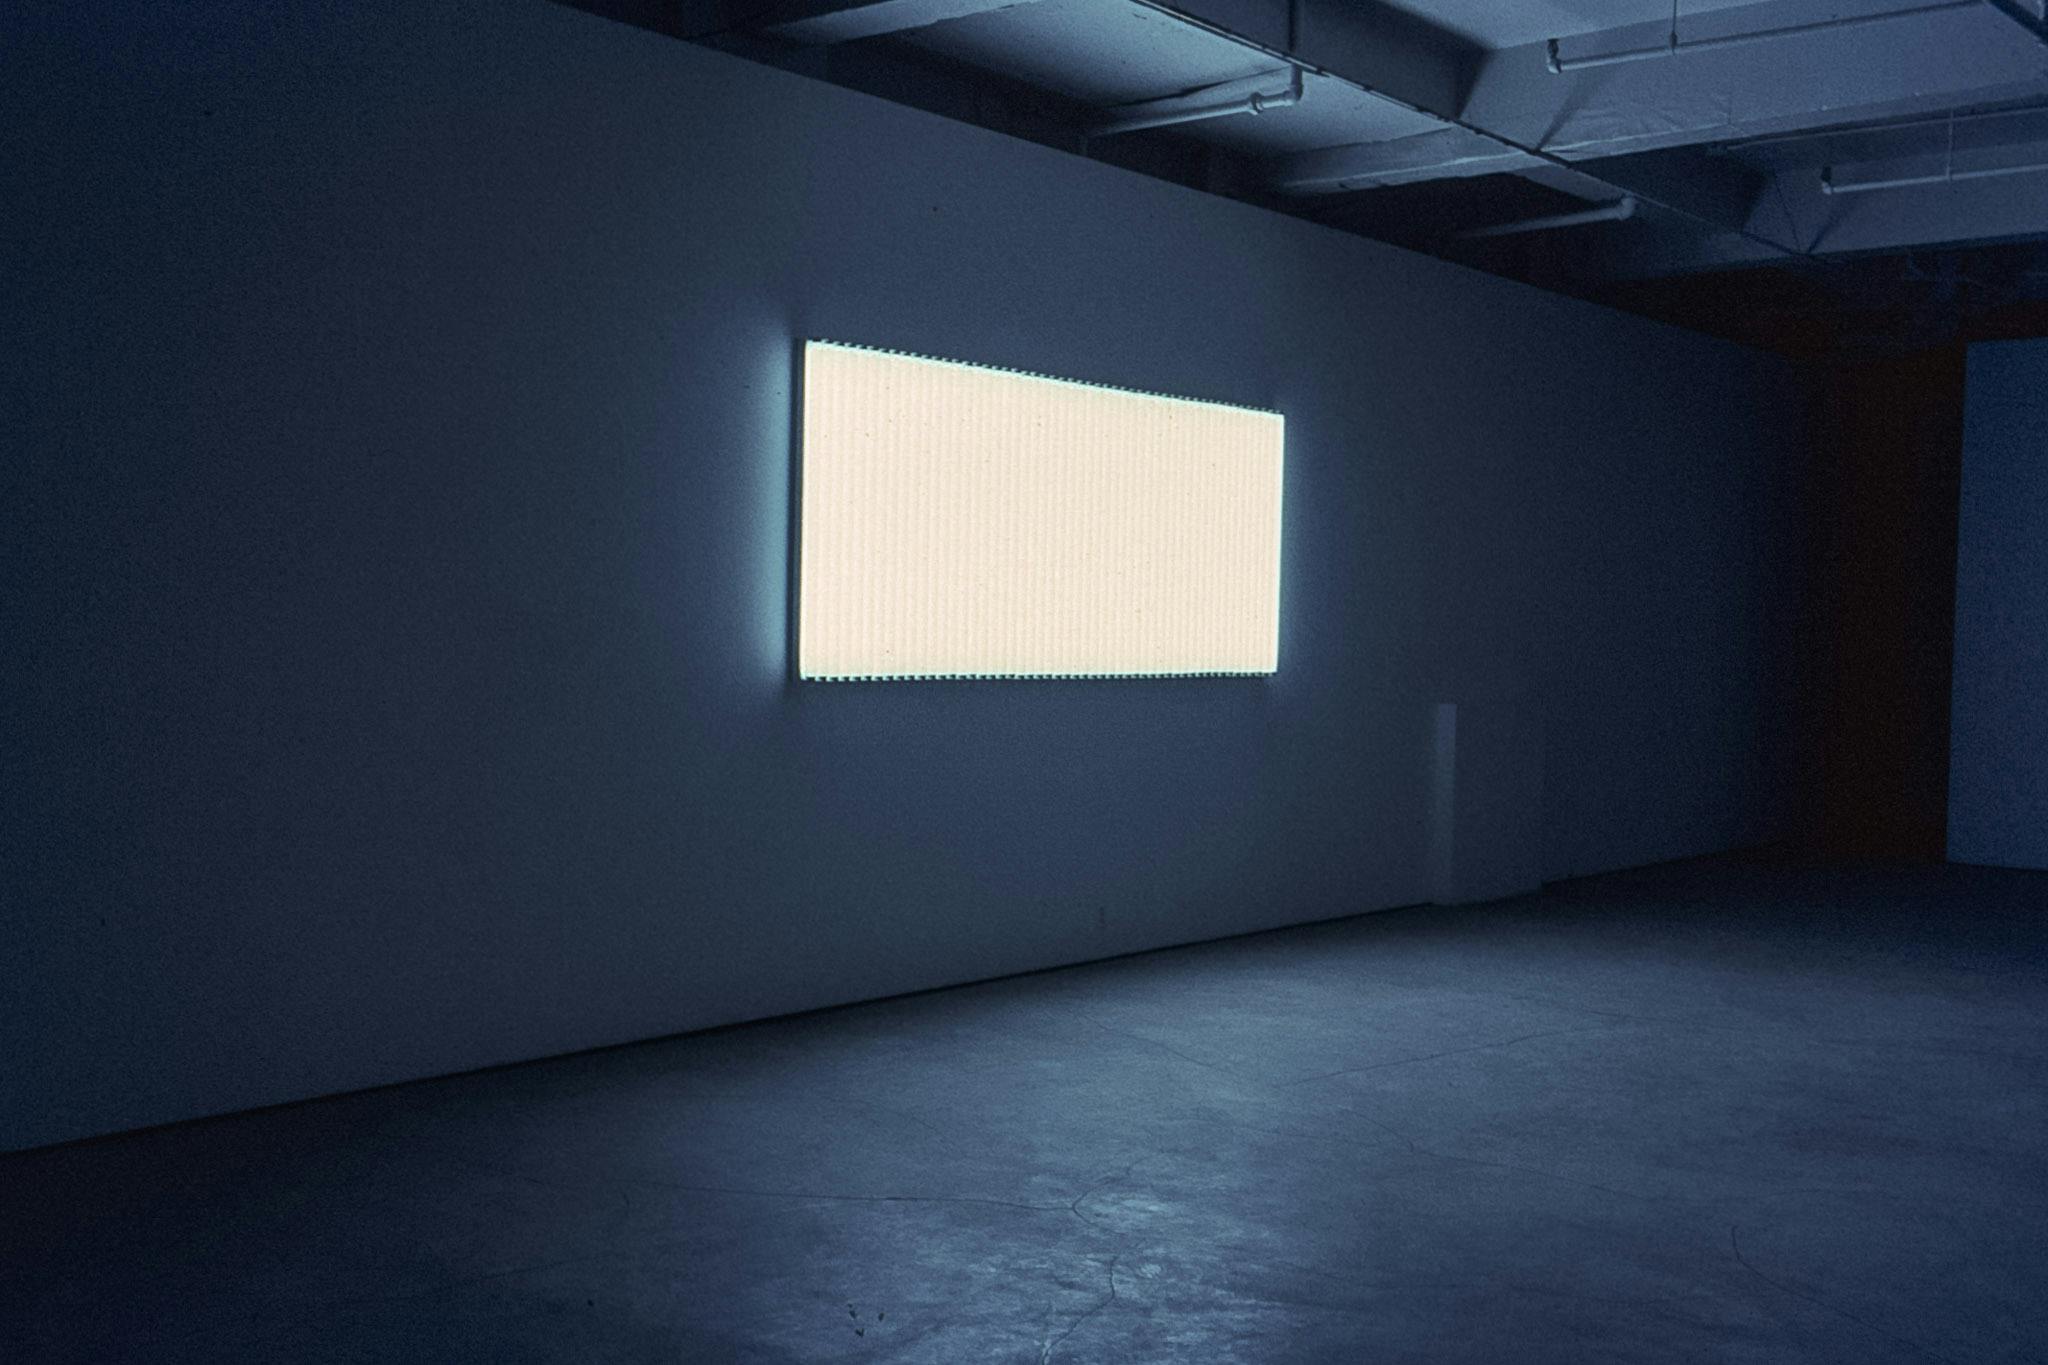 In a dark gallery space, there is a large, glowing panel mounted on the wall. The panel is a wide rectangle, with several thin strips of material running across it vertically.